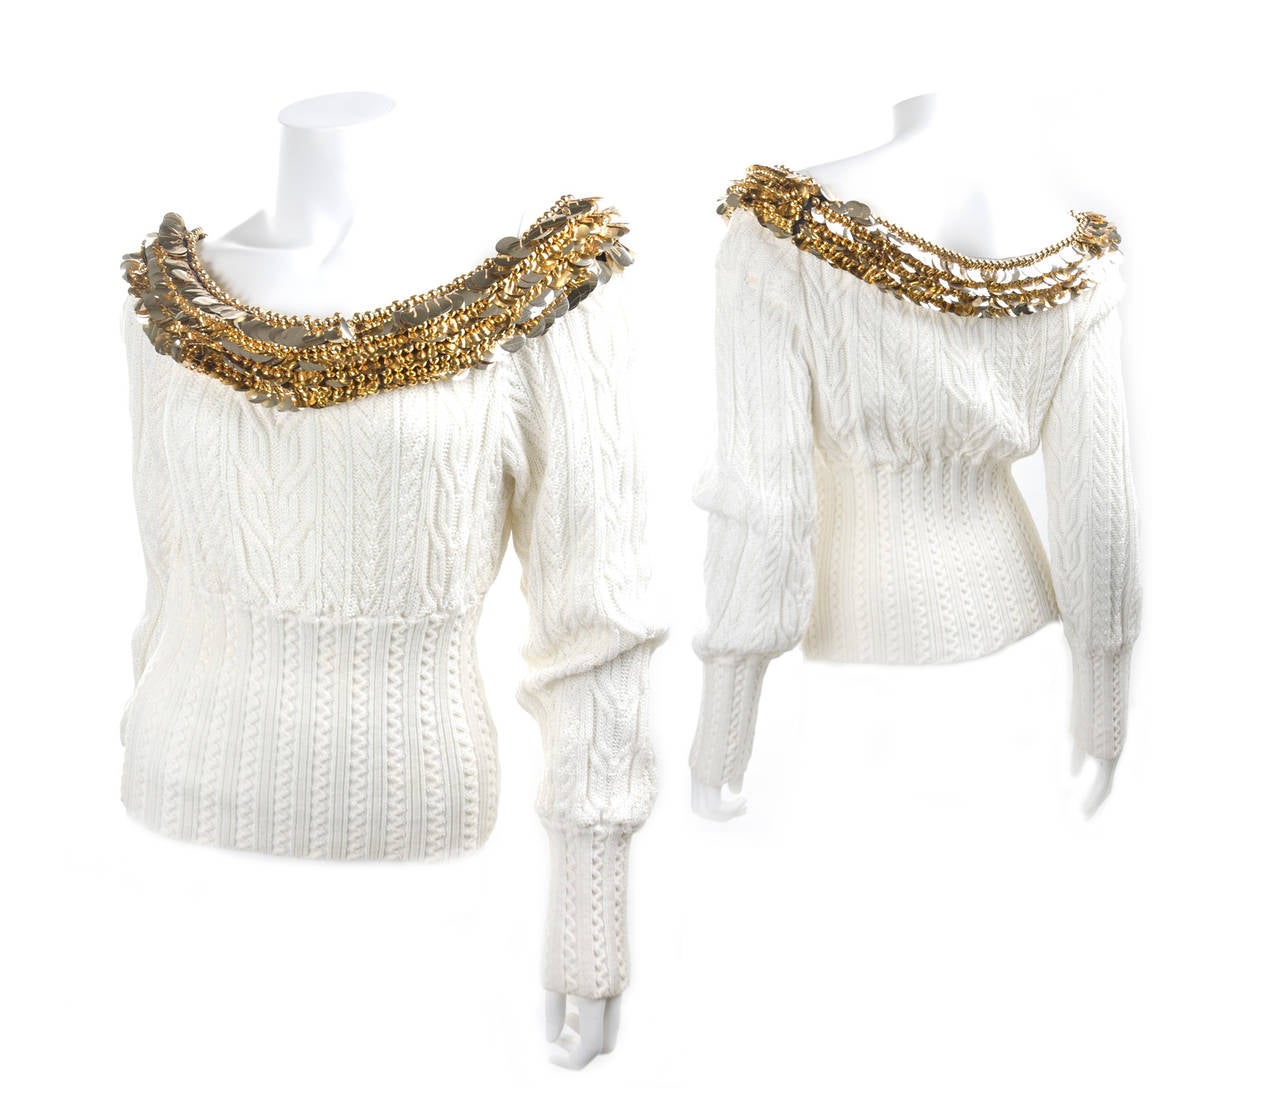 Yves Saint Laurent Sweater With Sequins and Beads.
Cotton knit with large gold sequins and beads
Size EU 40

Measurements:
Length 23